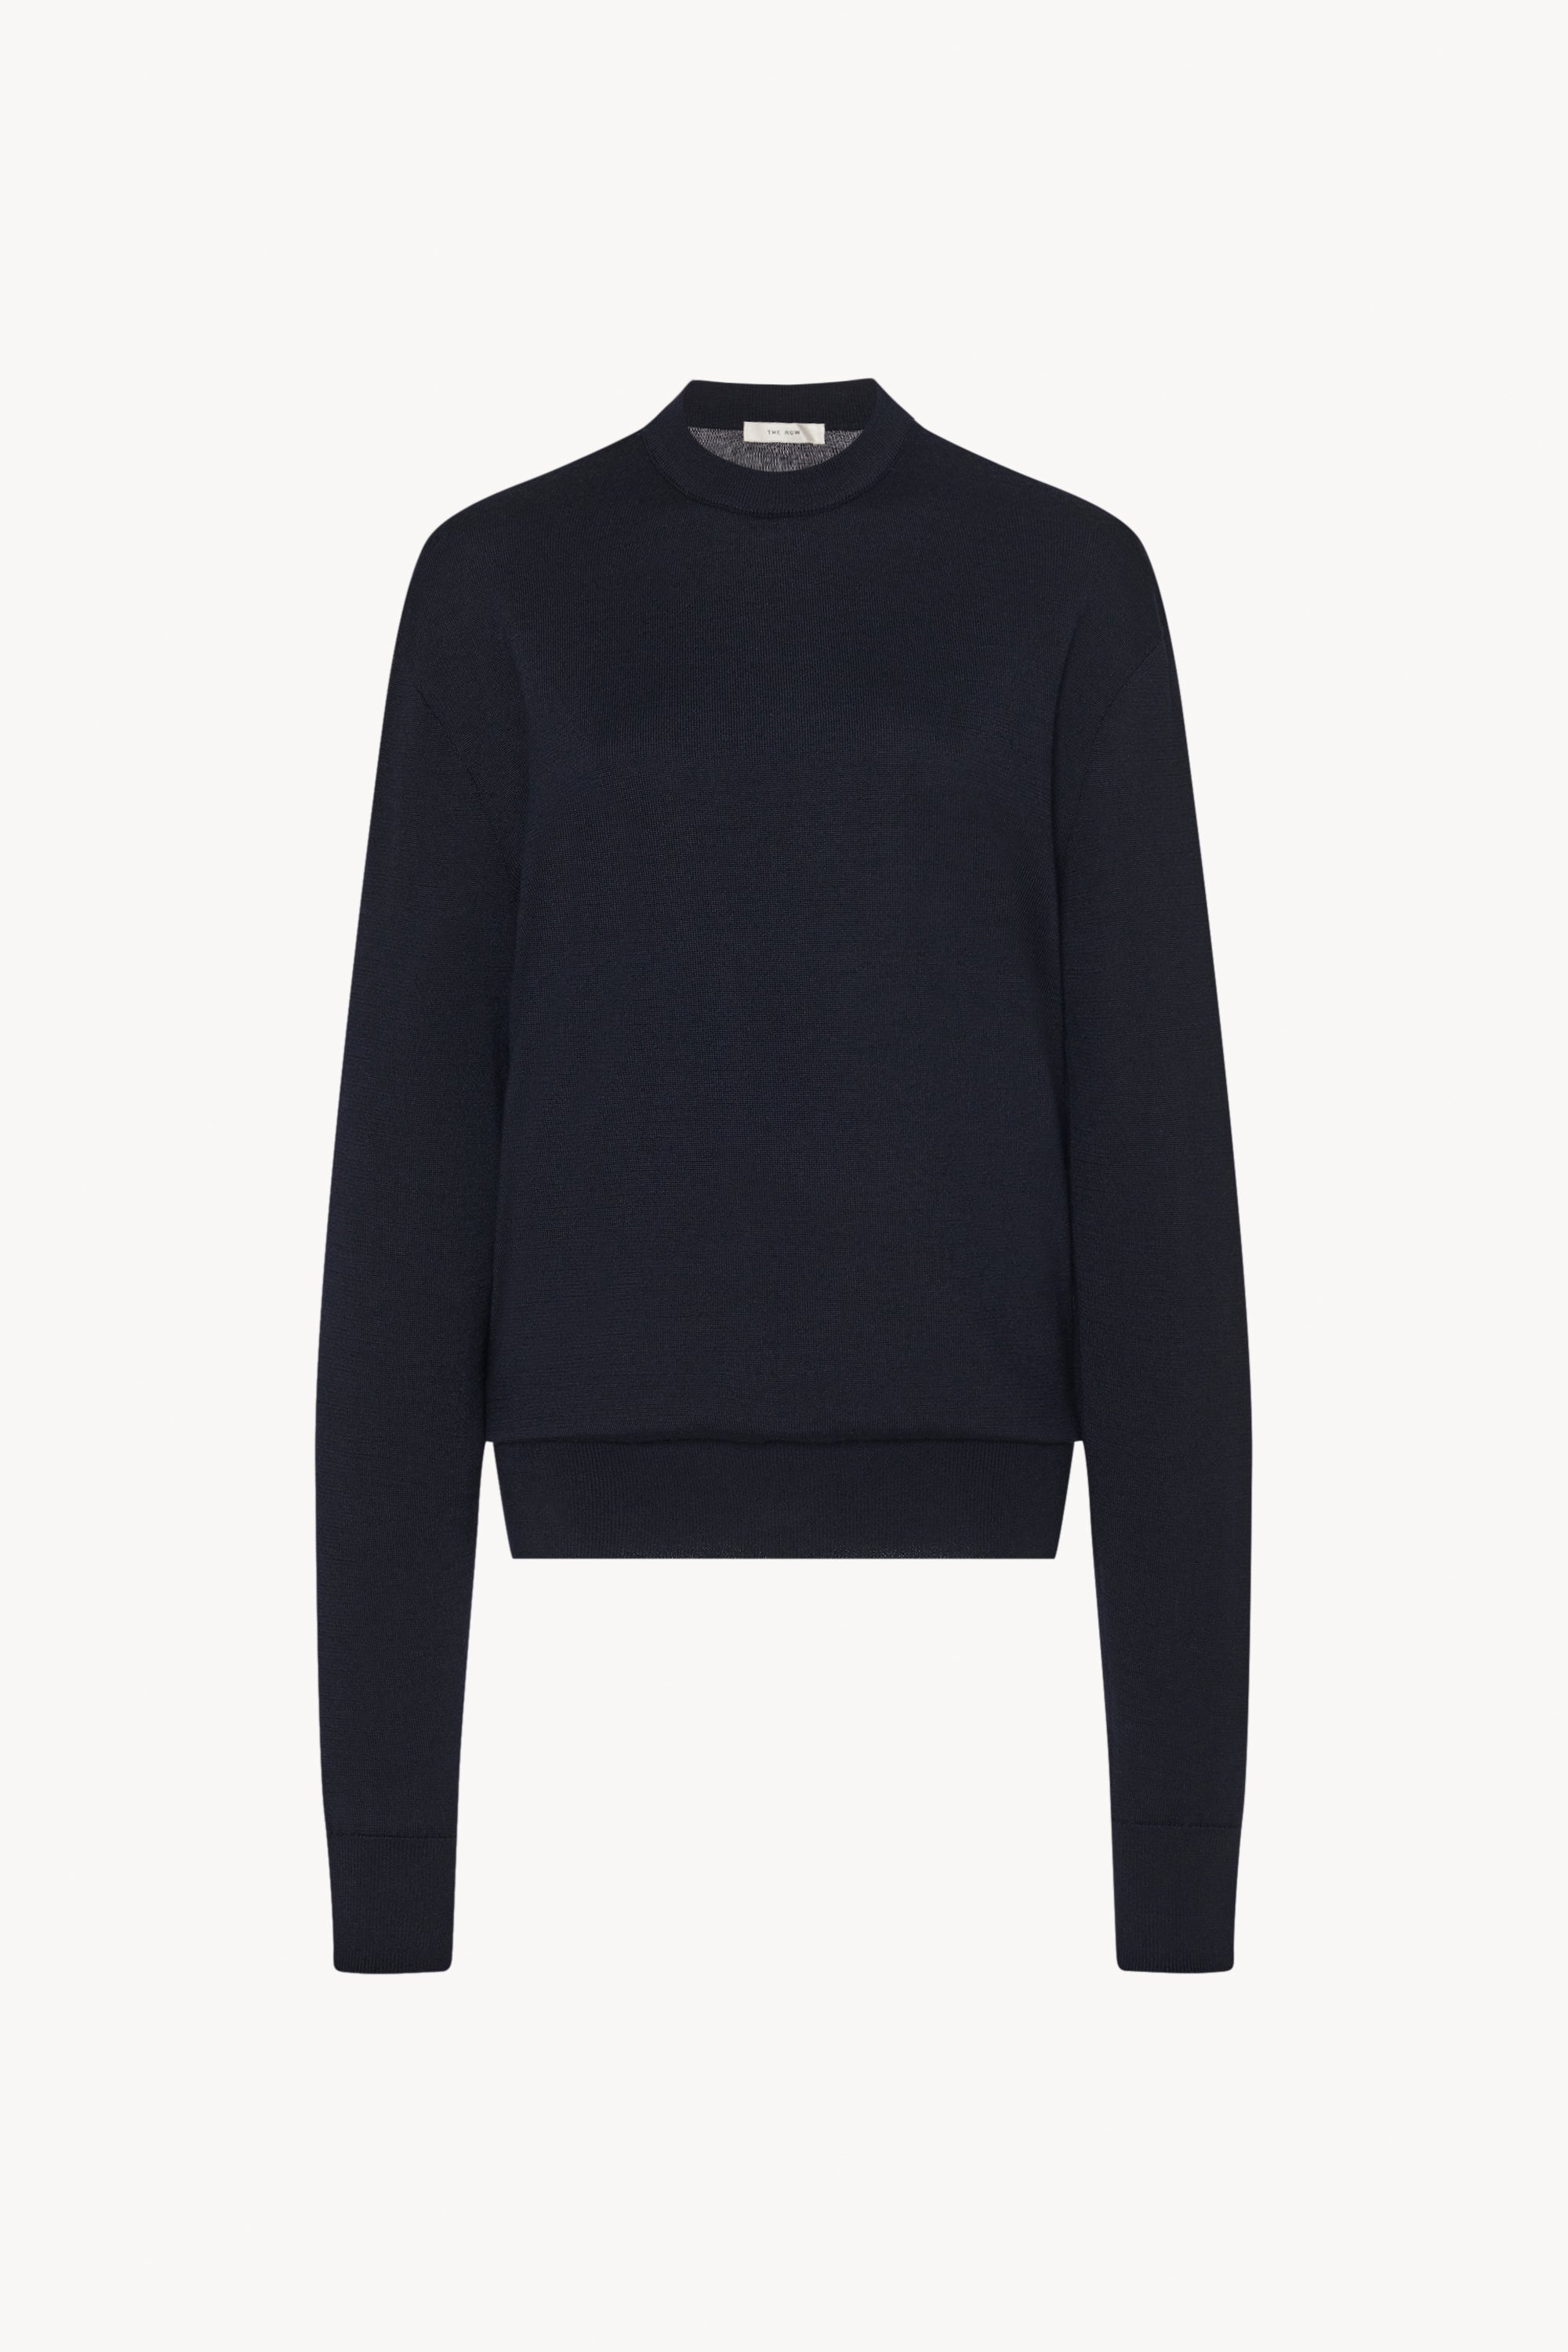 Druyes Top Blue in Wool and Cashmere – The Row